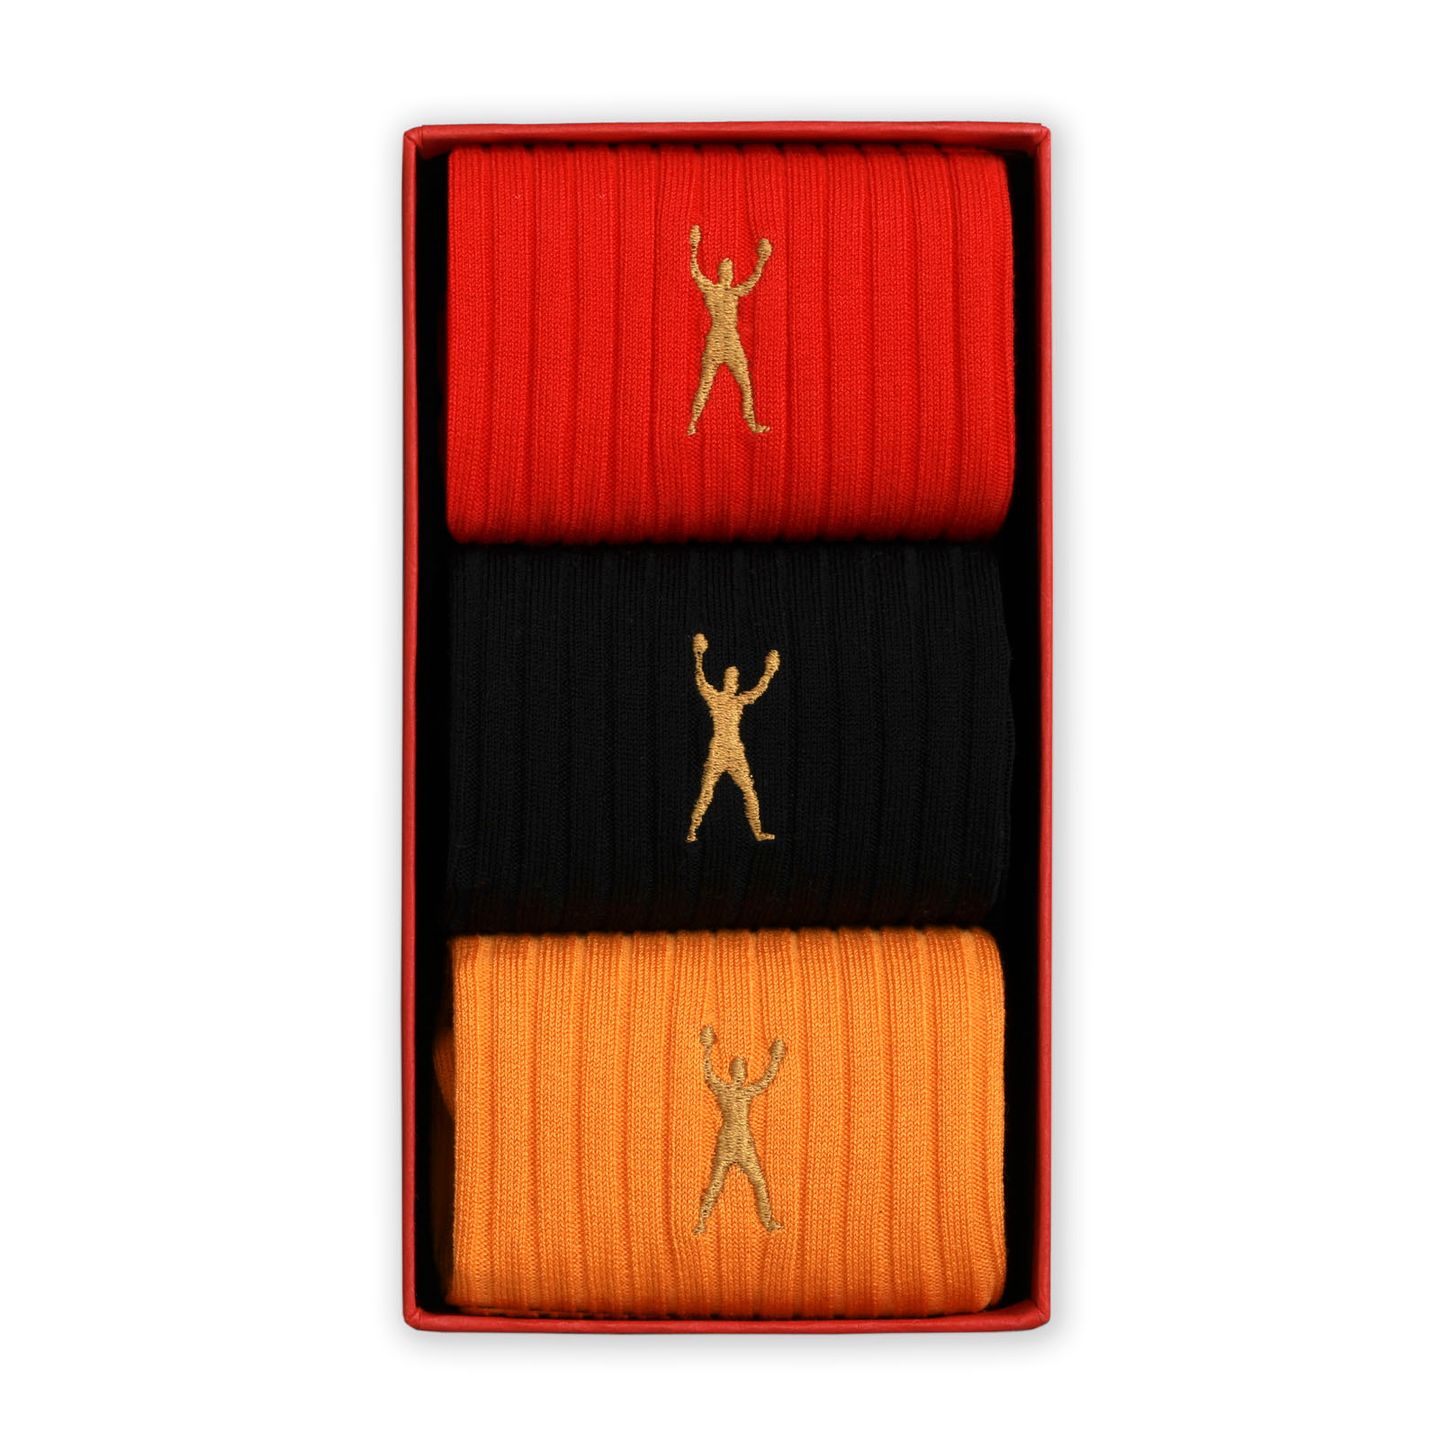 Trio box of Muhammad Ali socks in red, black and yellow with a gold logo